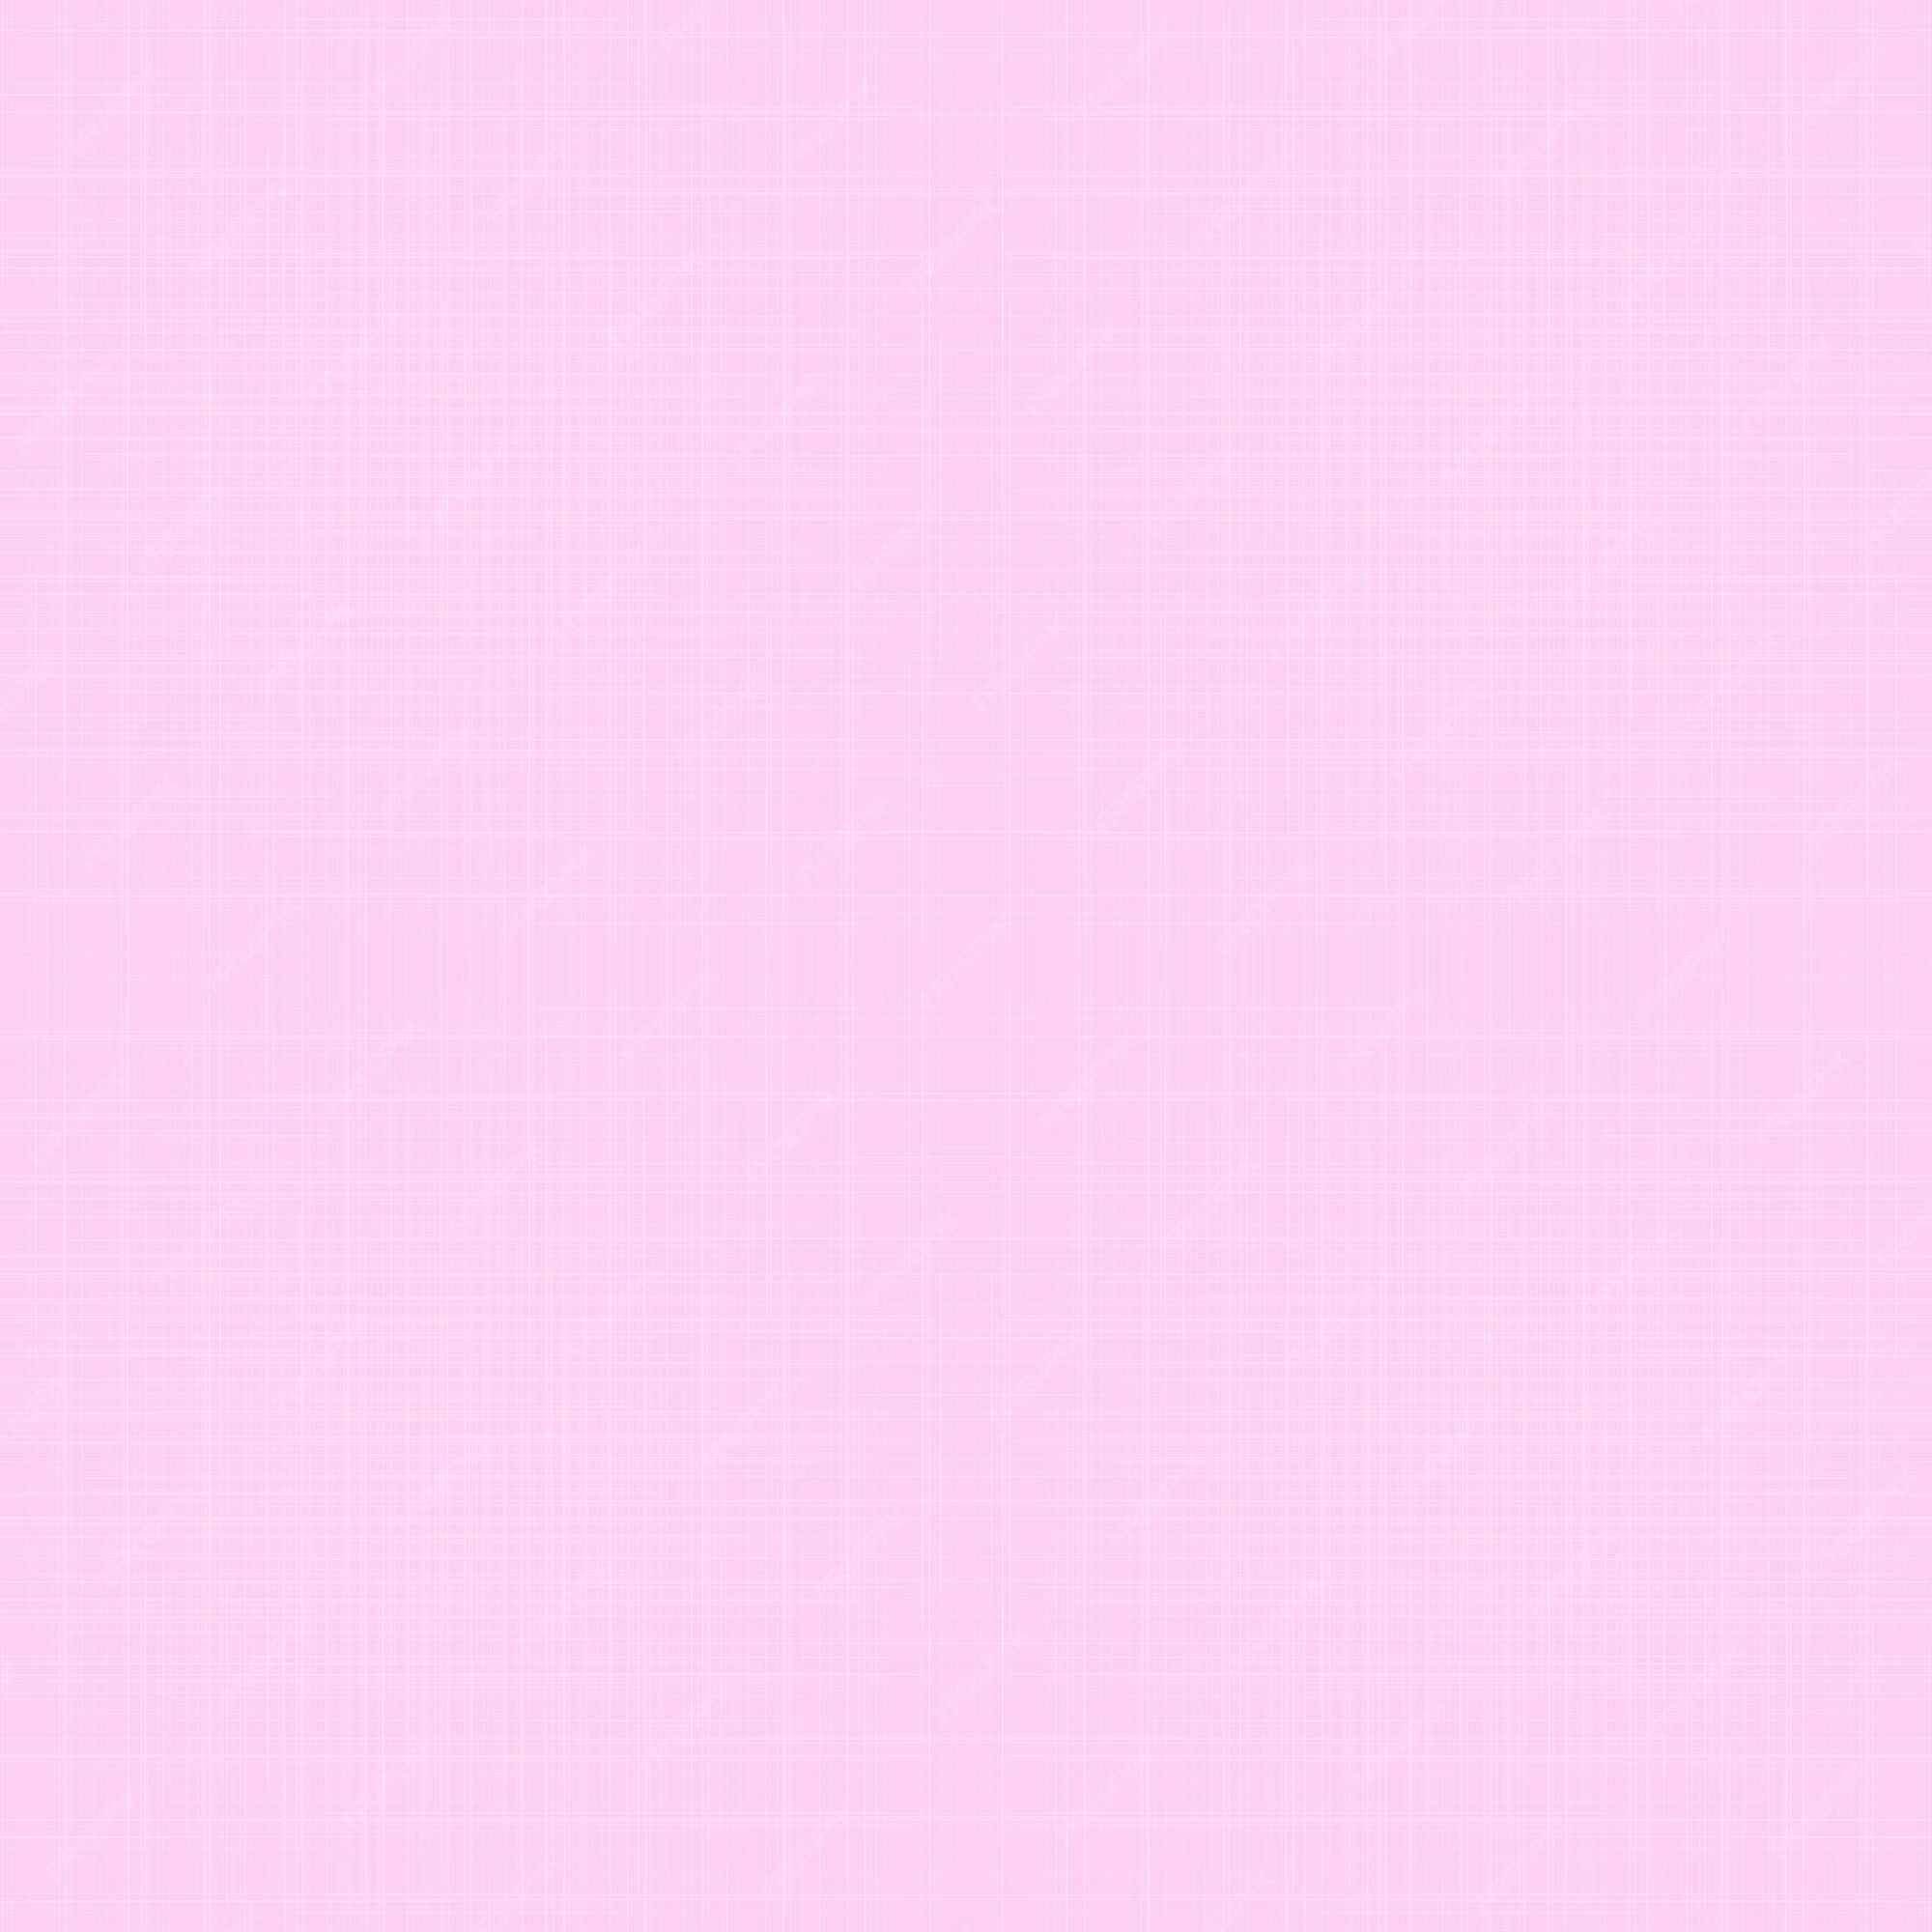 A pink fabric texture with a grid pattern, seamless and abstract. - Soft pink